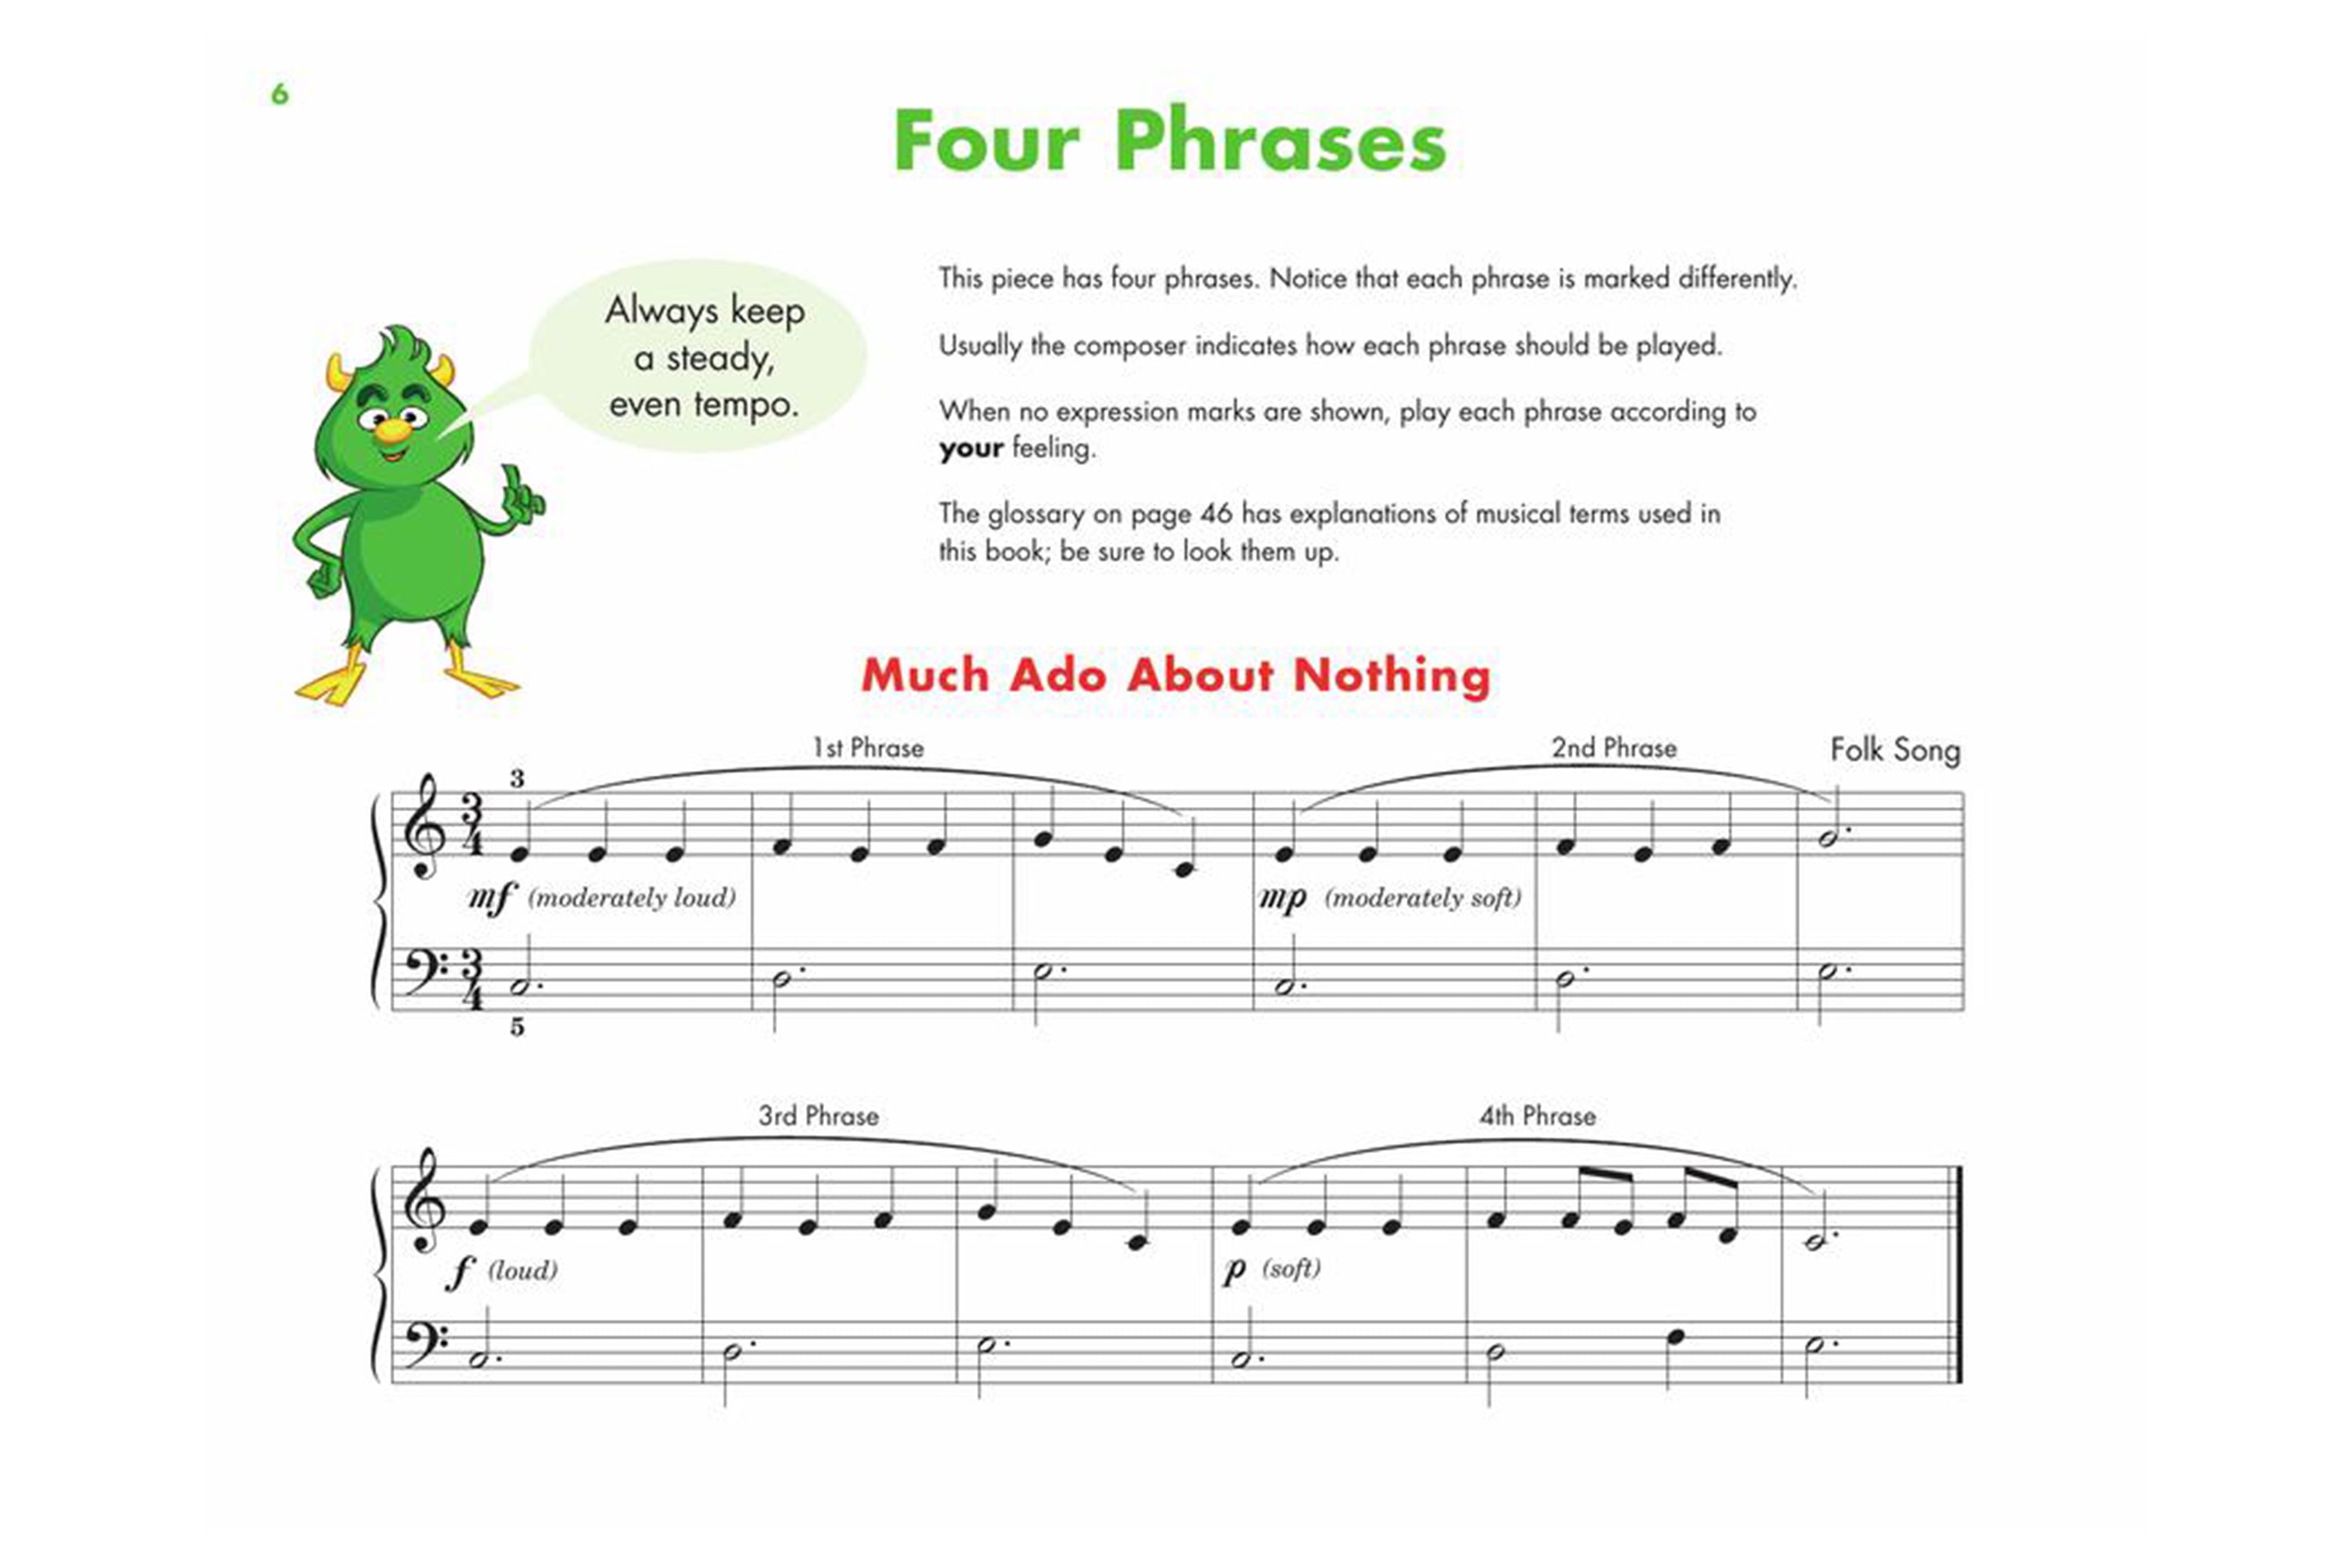 John Thompson's Easiest Piano Course - Part 3 – Book Only